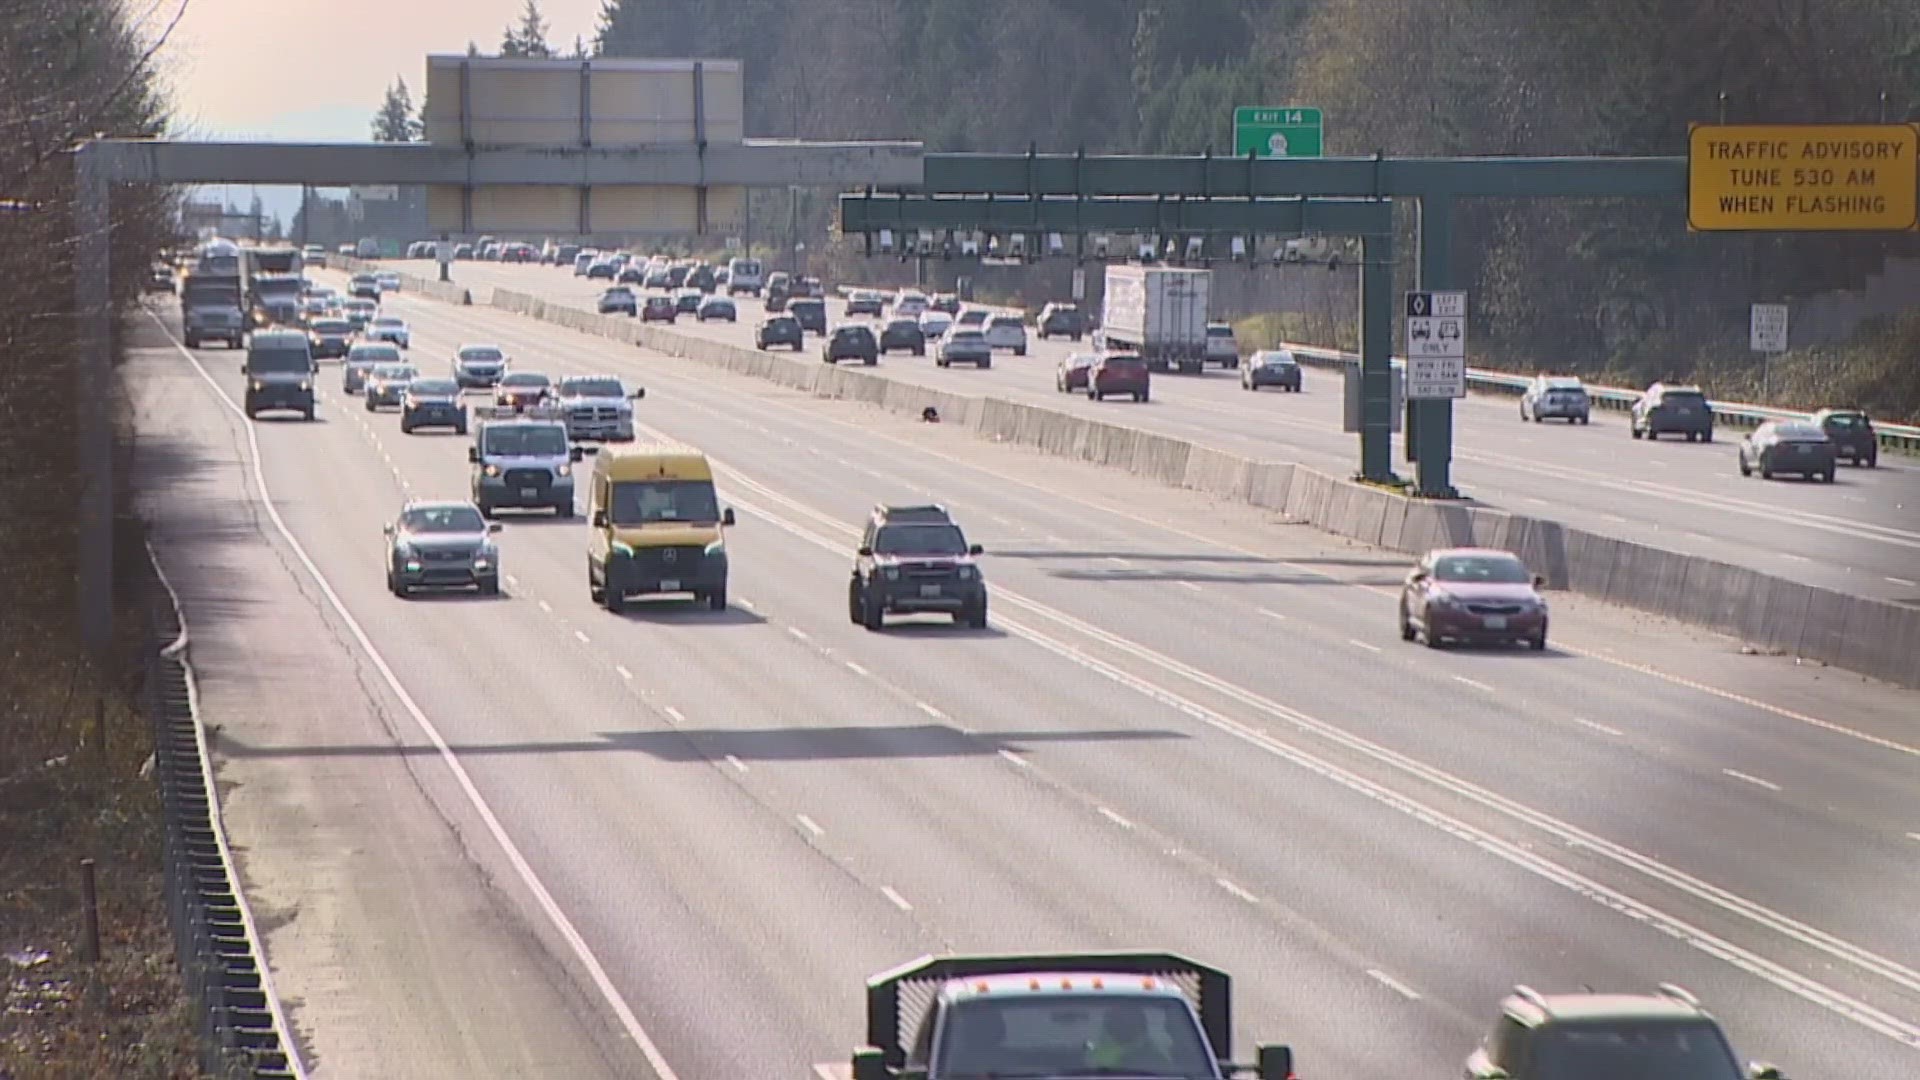 Lawmakers directed a commission to review rates in hopes of reducing traffic volume in toll lanes and raising money for construction work.